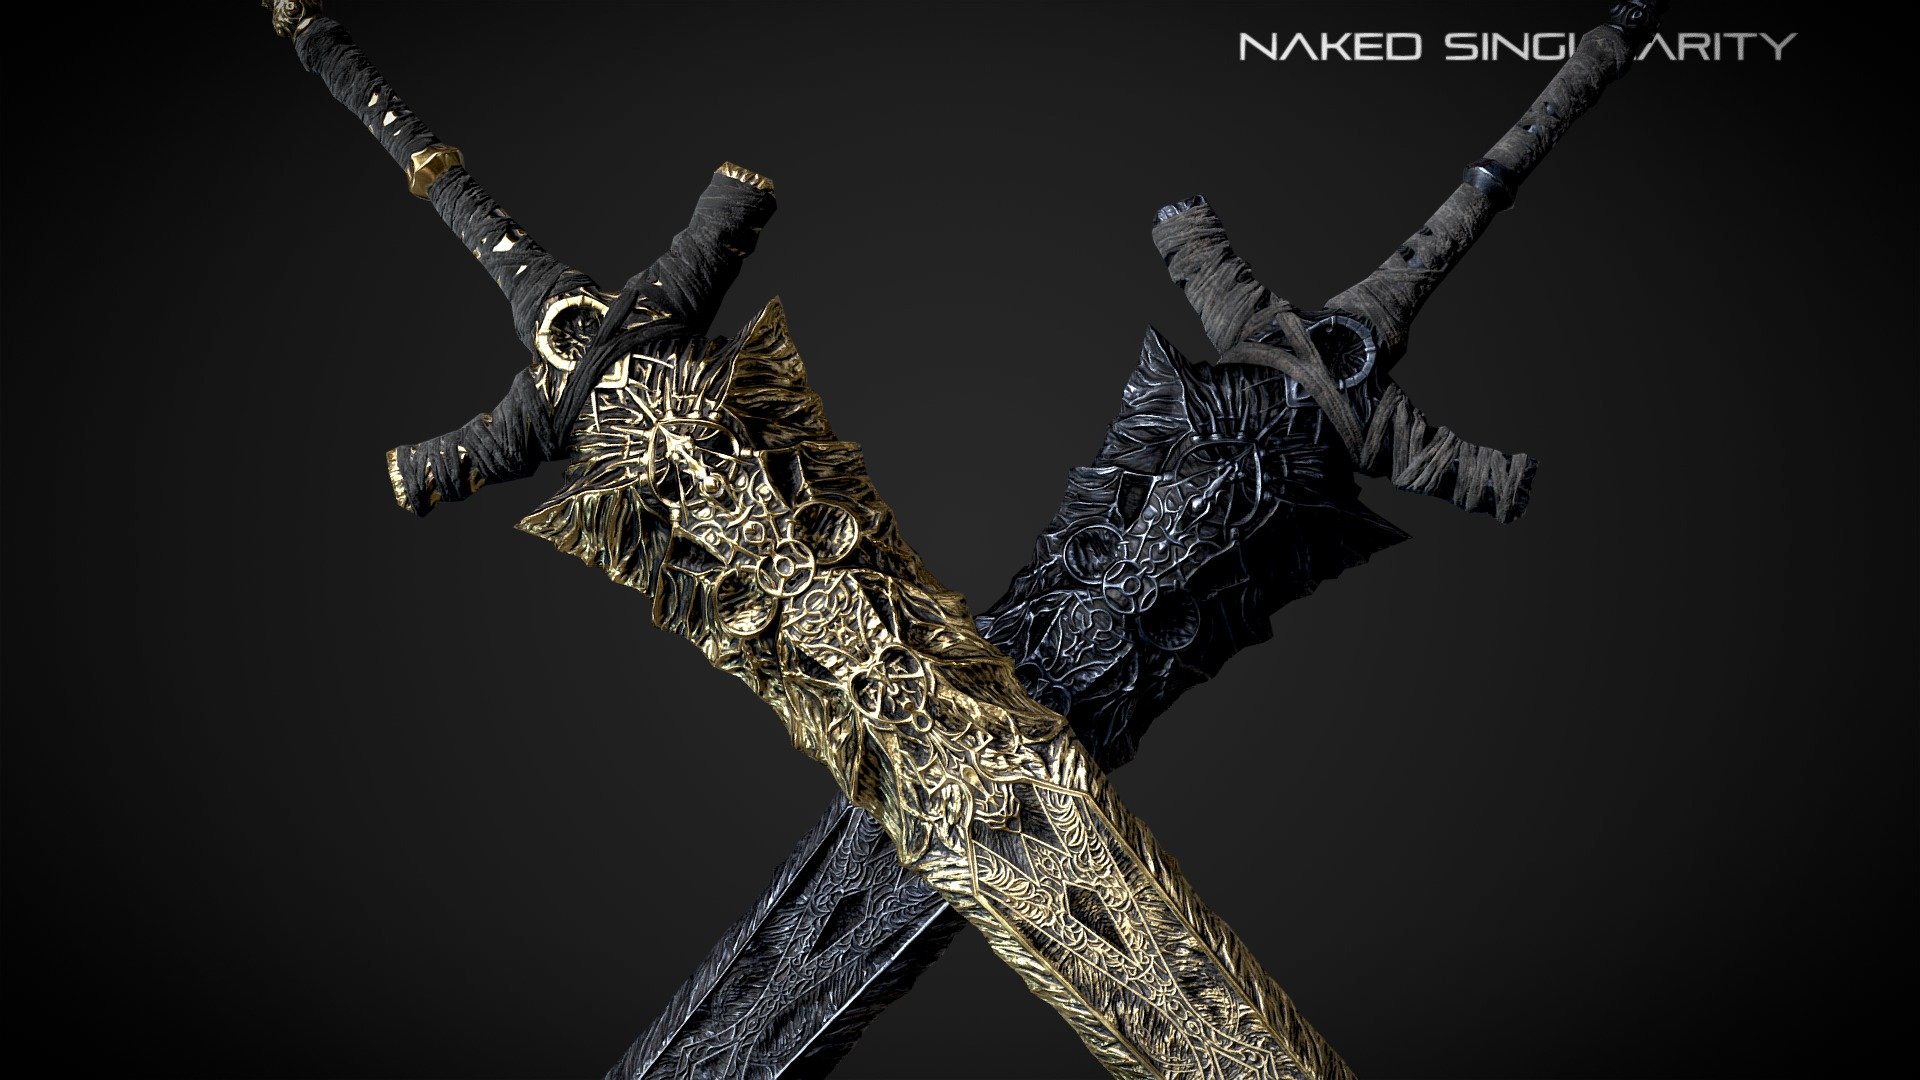 Ancient Black Great Sword | Medieval dark fantasy weapon | 4K | Lowpoly | PBR

Original concept by Naked Singularity (noAI). Inspire by Dark Souls triology and Elden Ring




2 material options

High quality low poly model.

4K High resolution texture.

Real world scale.

PBR texturing.

Check out other Dark fantasy game asset

Customer support: nakedsingularity.studio@gmail.com

Follow us on: Youtube | Facebook | Instagram | Twitter | Artstation - Ancient Black Great Sword | dark fantasy sword - Buy Royalty Free 3D model by Naked Singularity Studio (@nakedsingularity) 3d model